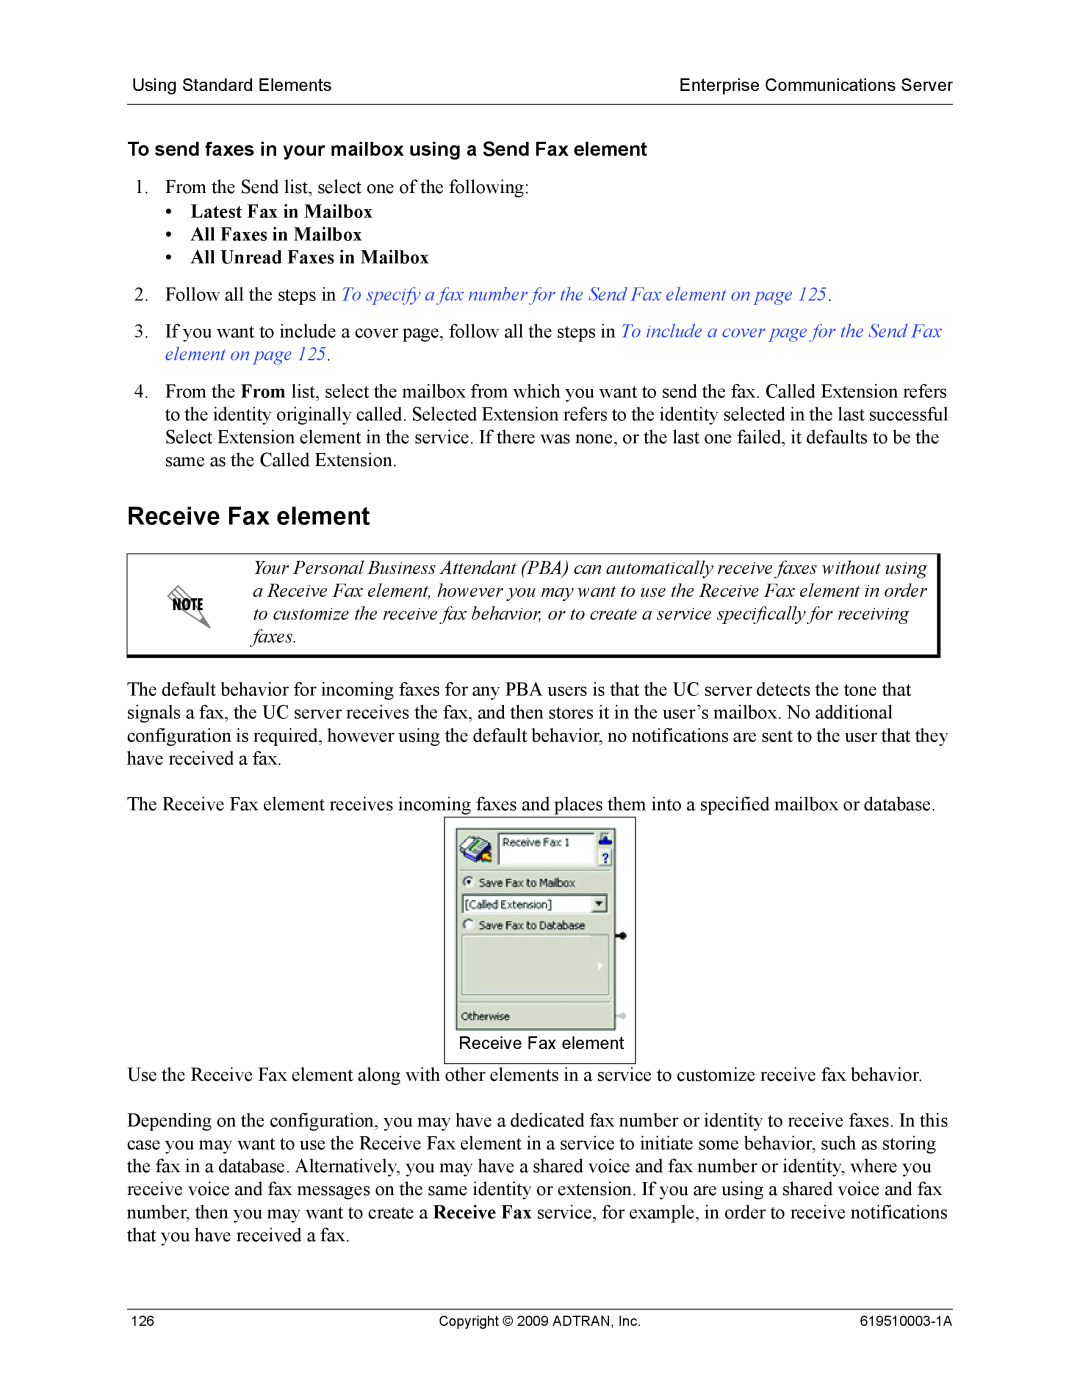 ADTRAN 619510003-1A manual Receive Fax element, To send faxes in your mailbox using a Send Fax element 